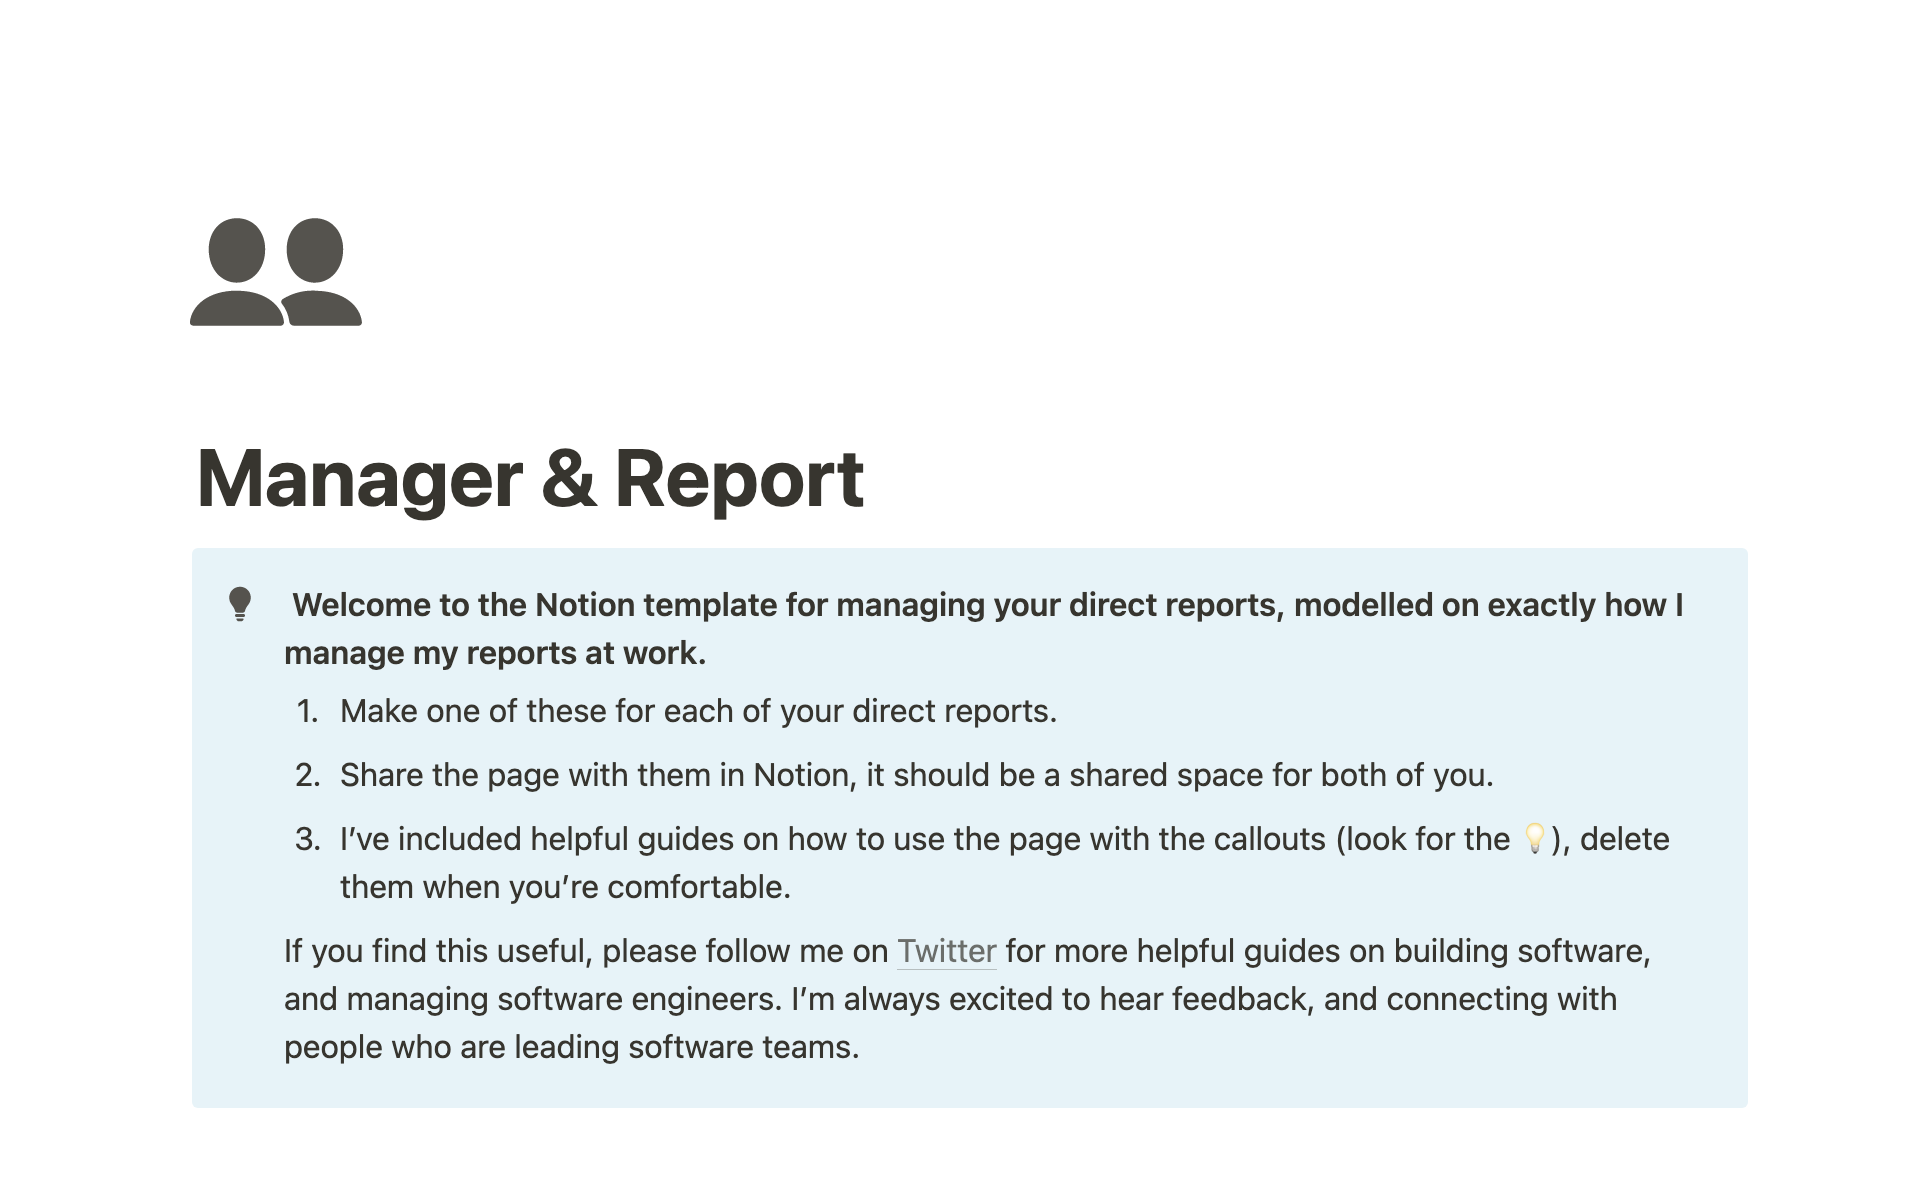 It's a one-stop place for managers and their reports to stay in sync.